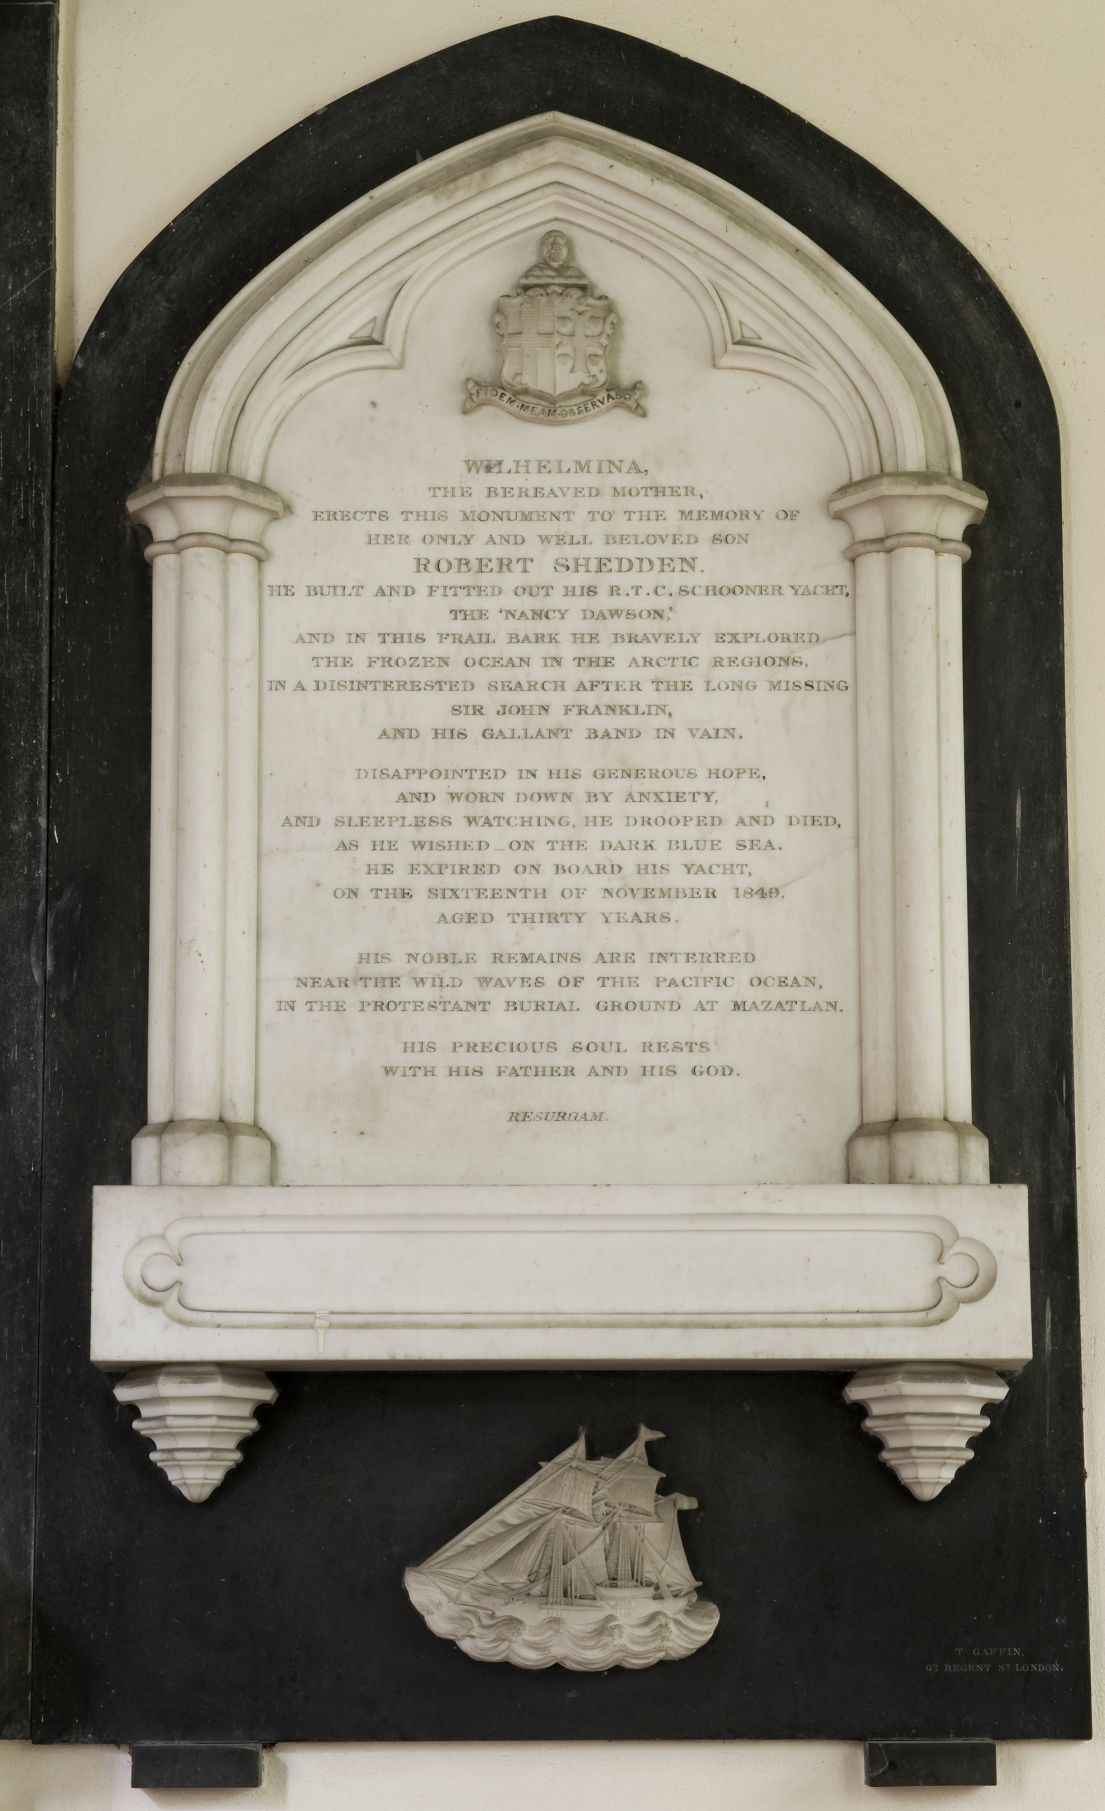 A white marble plaque dedicated to someone's beloved son, Robert Shedden, who died at sea. 